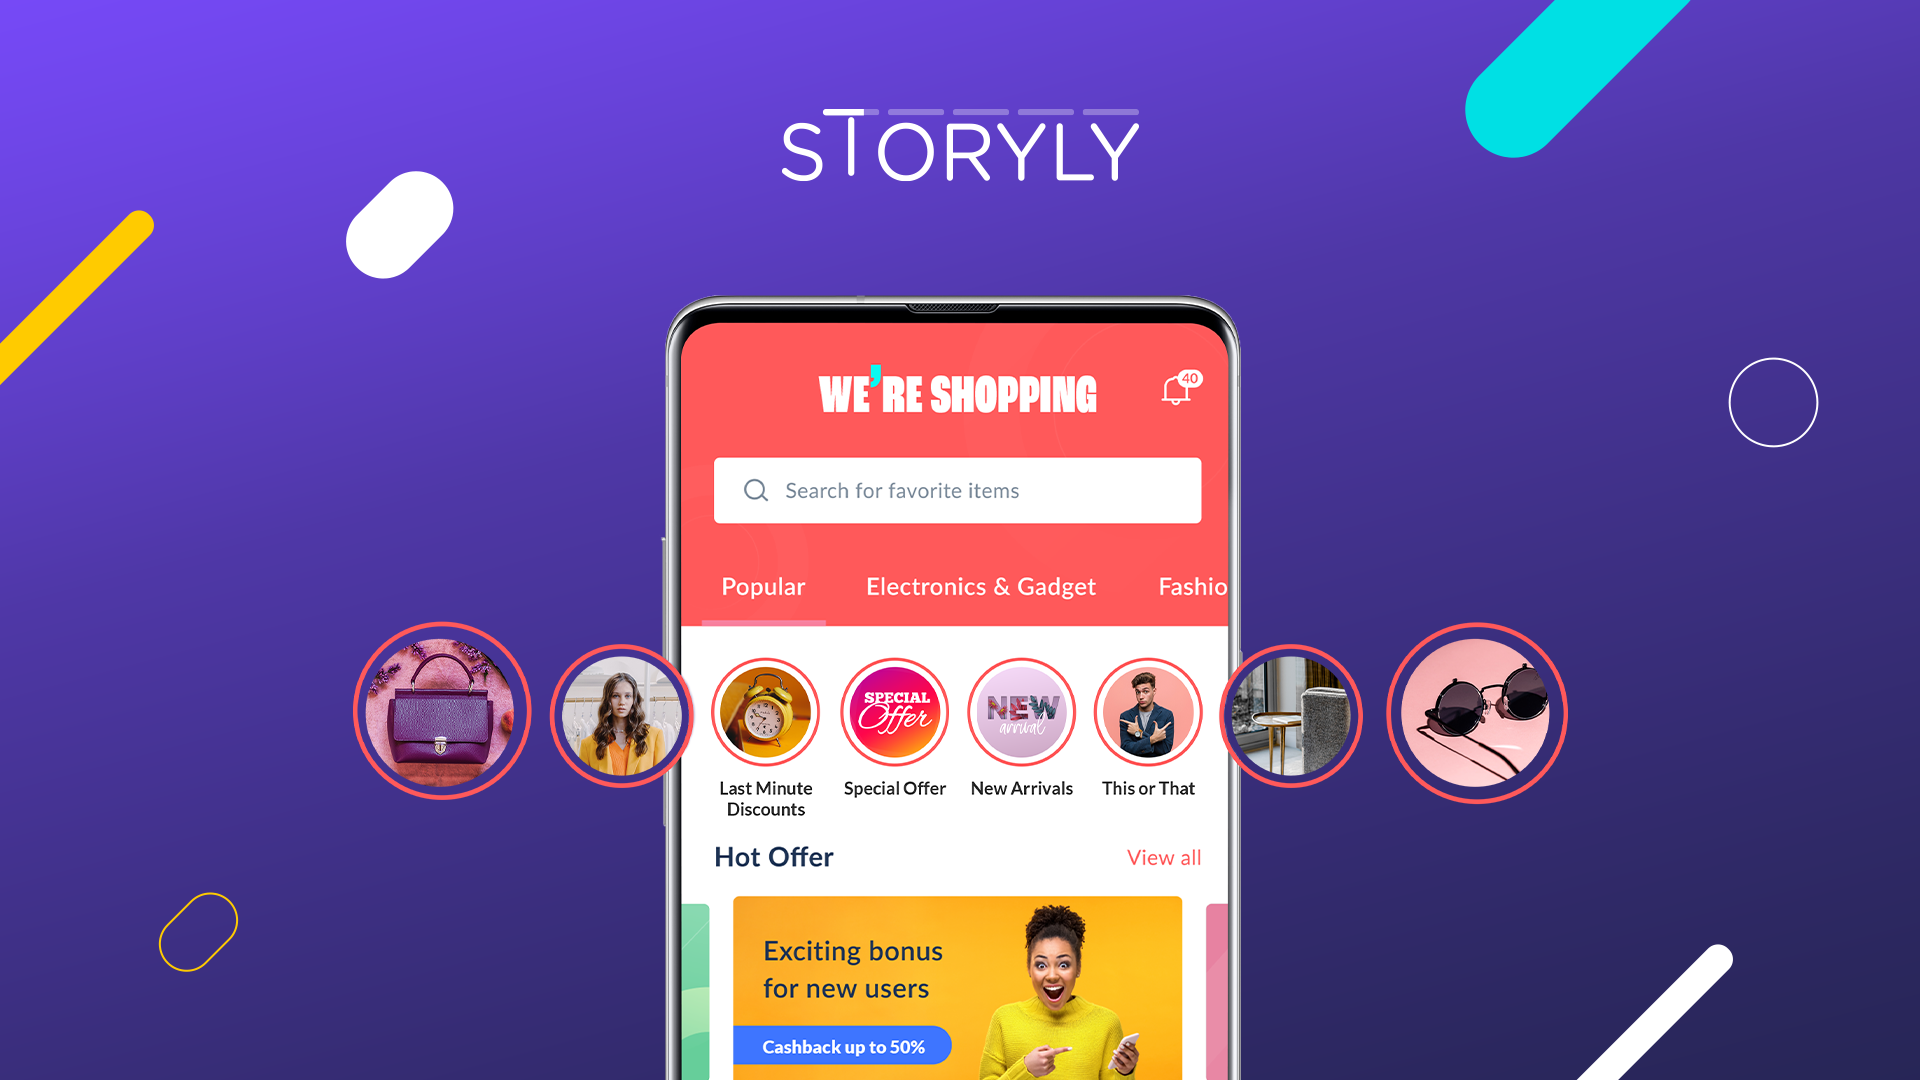 “Stories” promise high engagement rates for retail apps